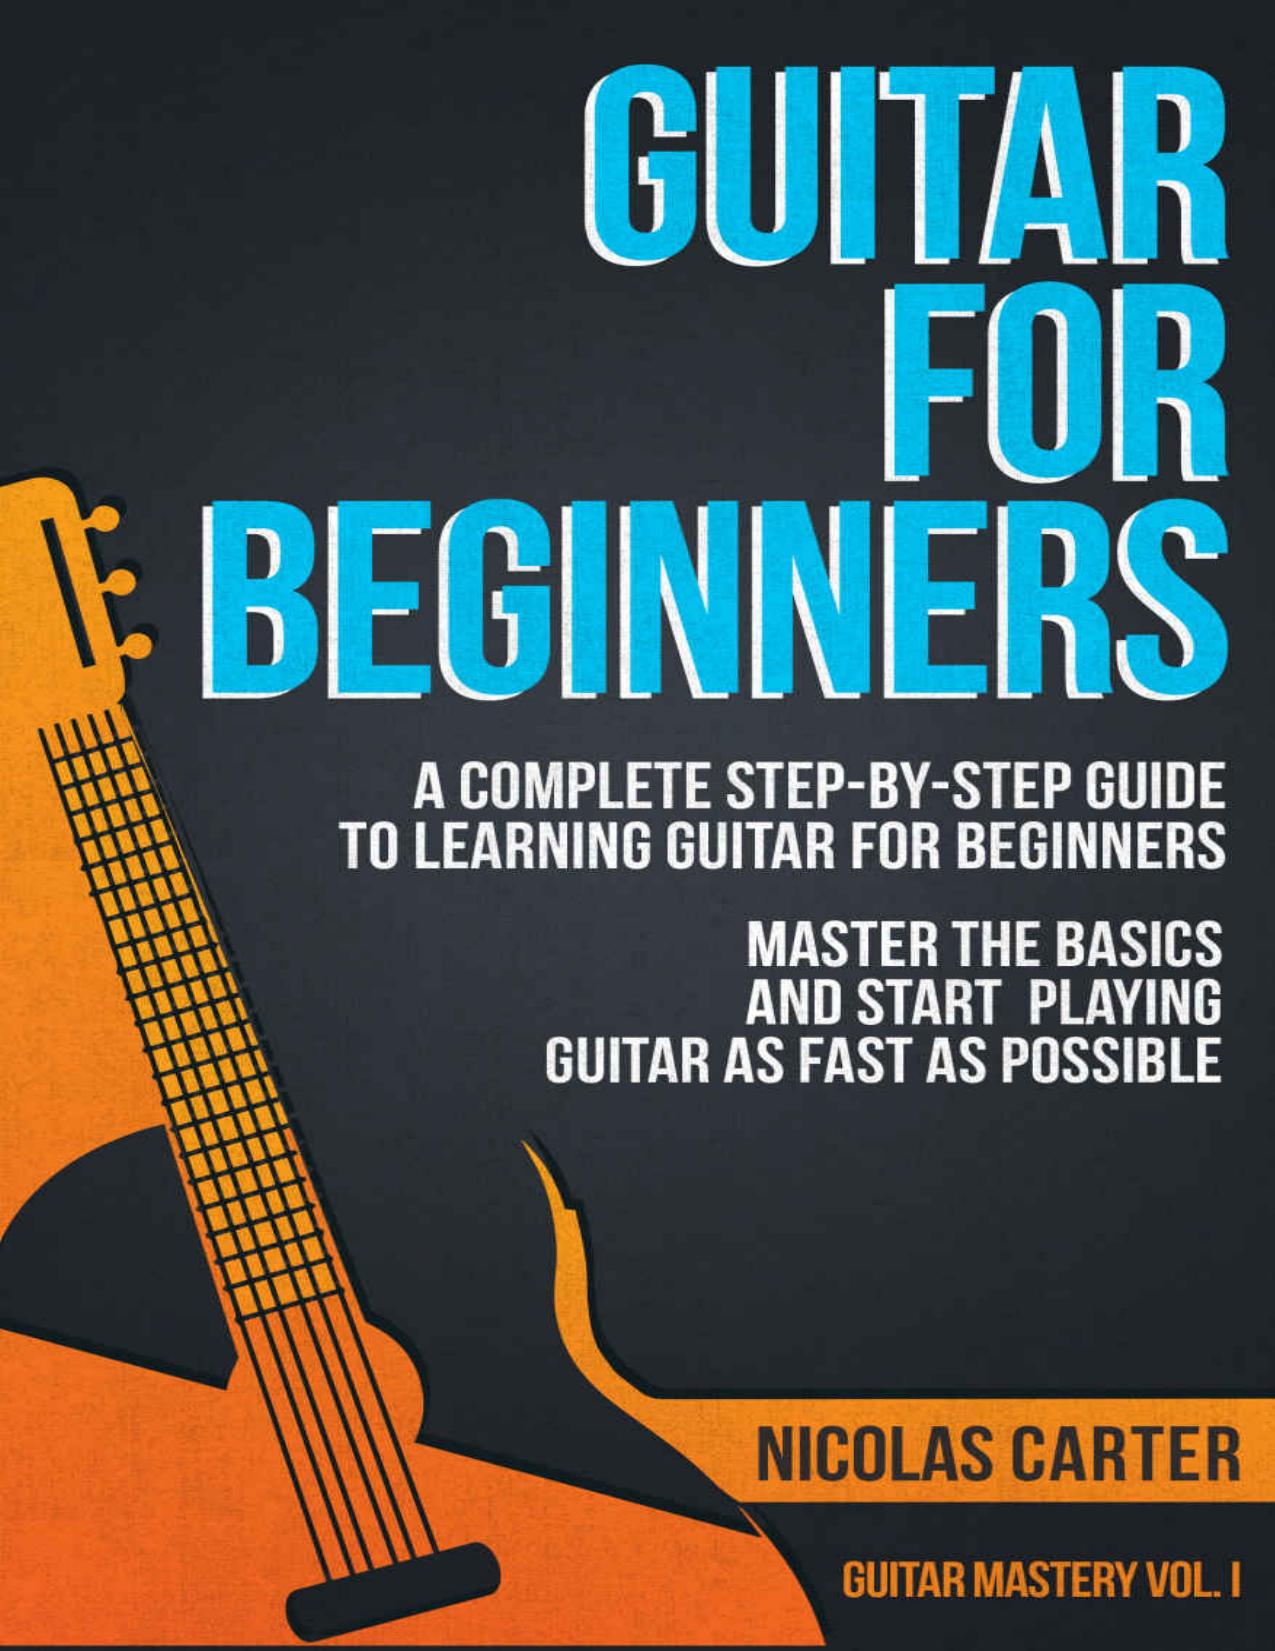 Guitar: For Beginners - A Complete Step-by-Step Guide to Learning Guitar for Beginners, Master the Basics and Start Playing as Fast as Possible by Nicolas Carter